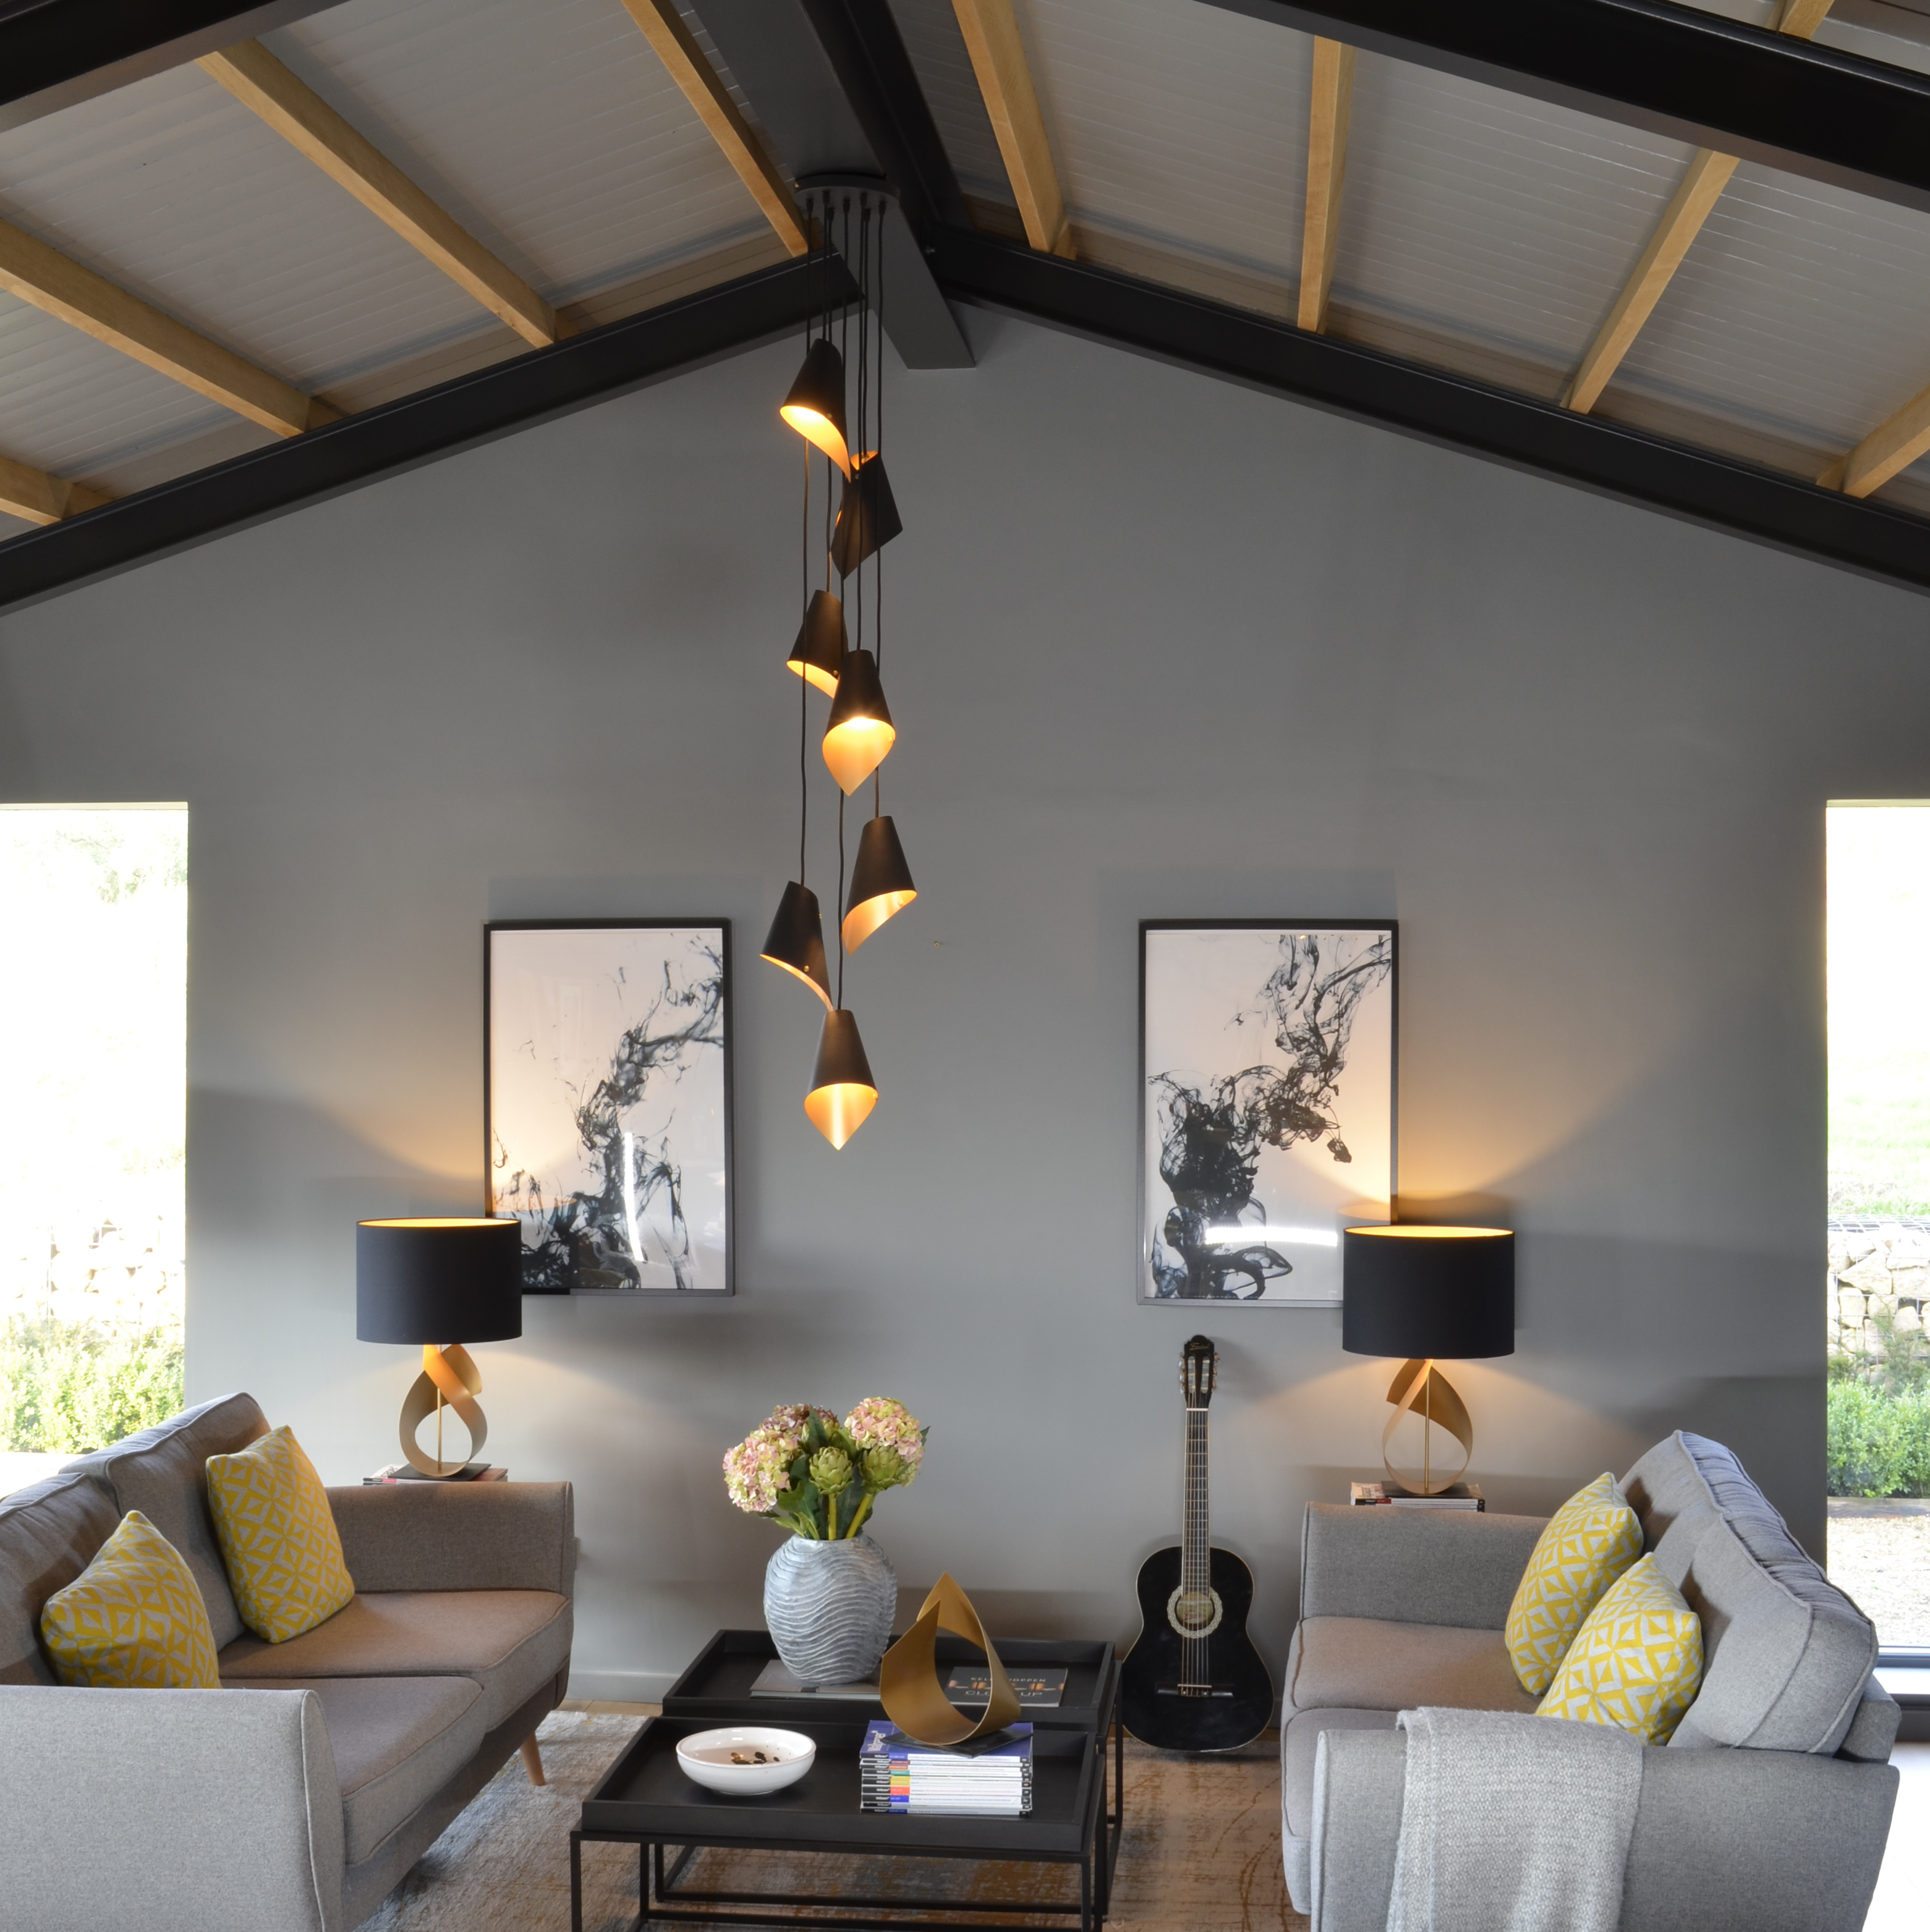 10 gorgeous lighting ideas for vaulted ceilings | homebuilding